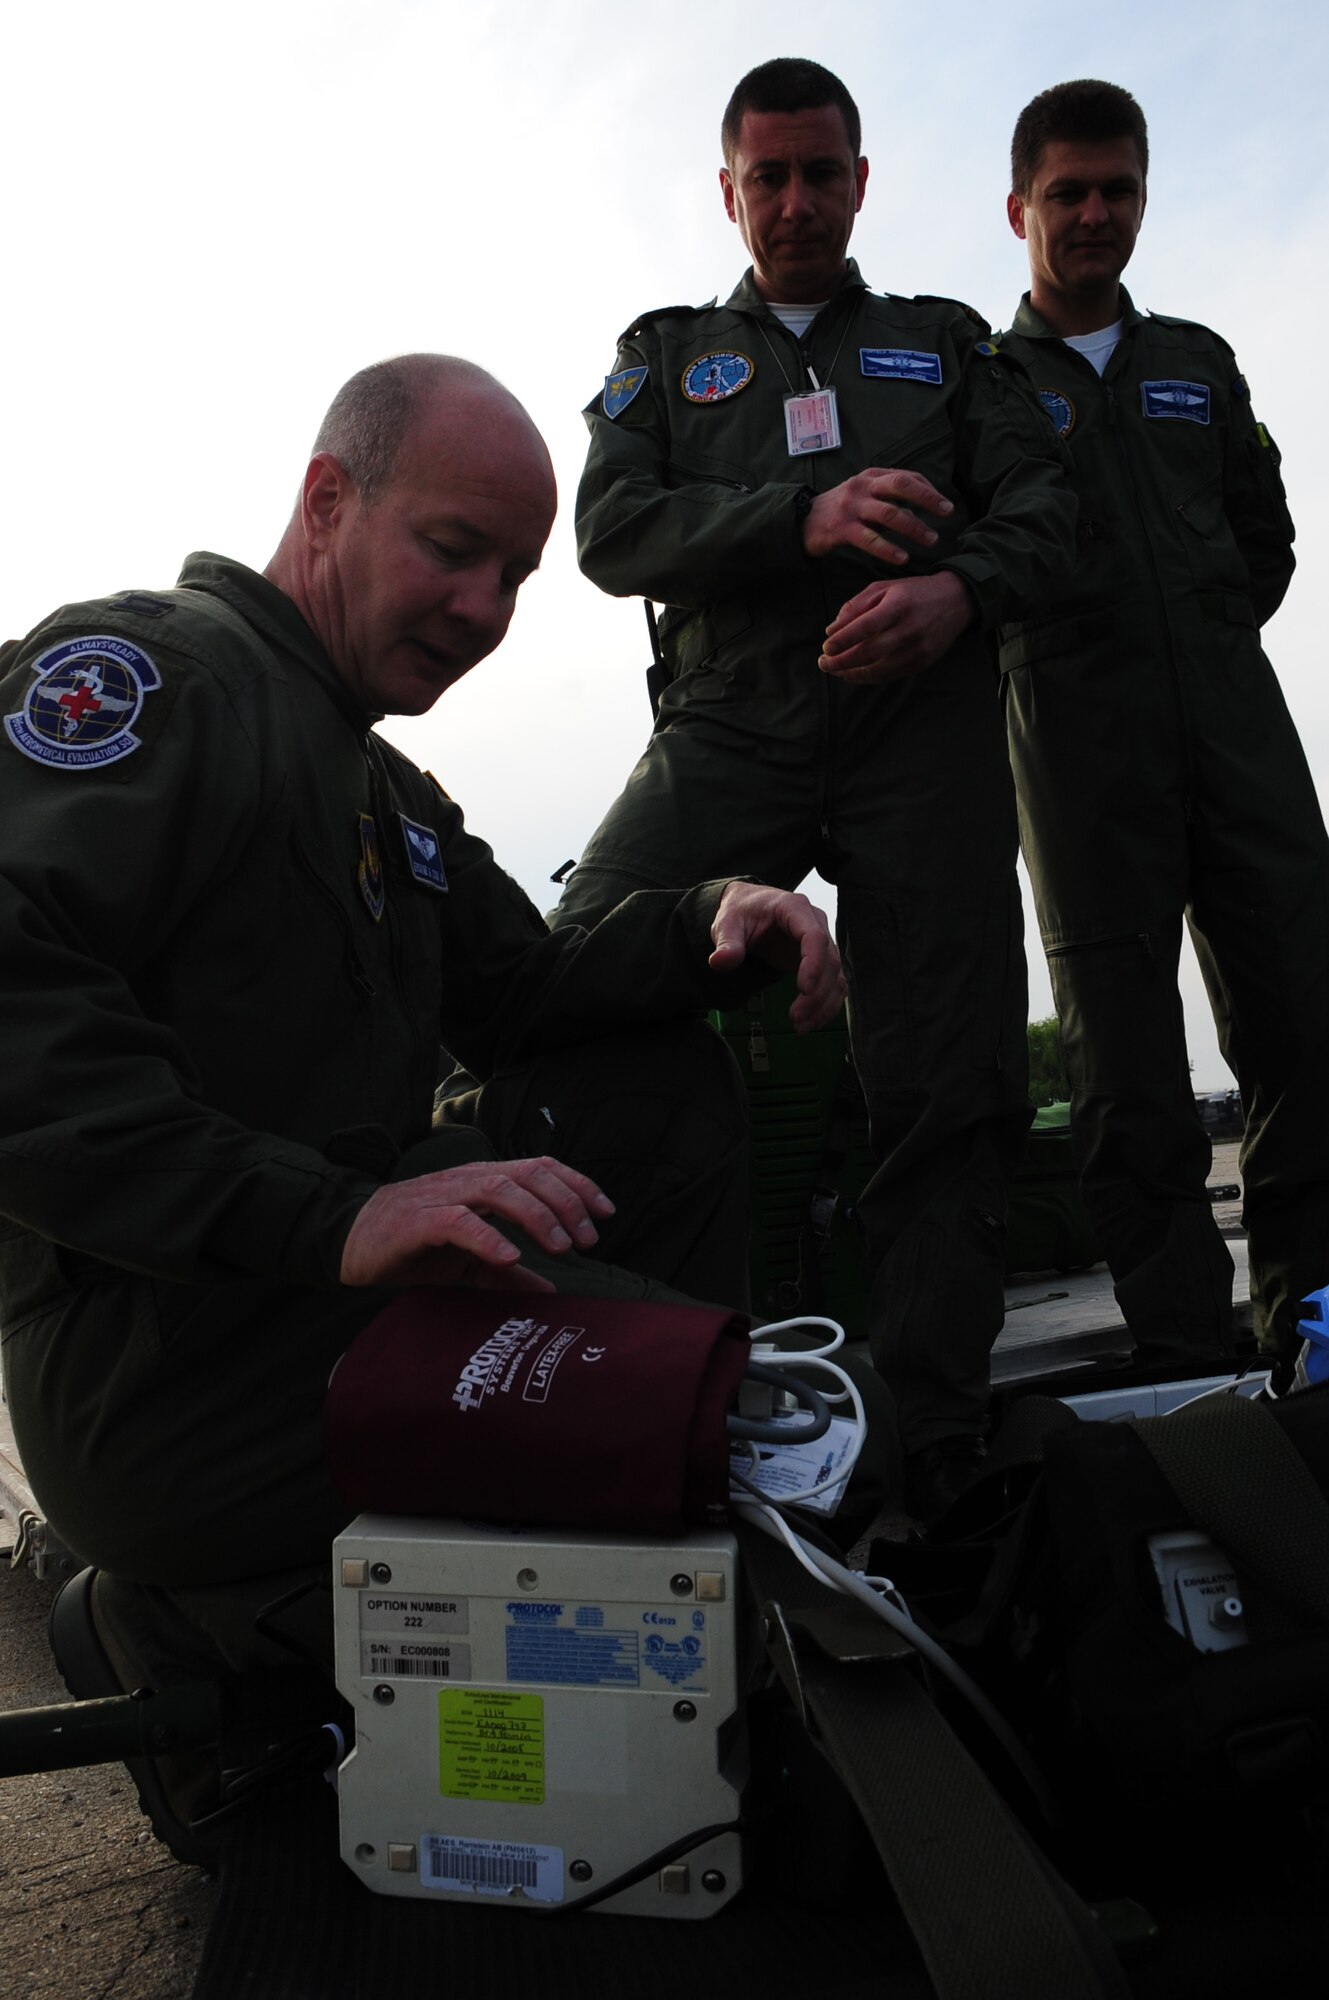 U.S. Air Force Capt. Erskine Cook Jr., 86th Aeromedical Evacuation Squadron flight nurse, familiarizes Romanian Air Force medical evacuation counterparts with equipment and procedures used to evacuate patients during the joint exercise Carpathian Summer, Airlift Base Otopeni, Romania, May 12, 2010. Carpathian Summer 2010 was an exercise in which the Romanian Air Force invited members of the U.S. military to train with them on their soil and air space, to observe, firsthand, operations in action. This exercise was designed to build partnerships between these nations in an effort to work together more efficiently during real world scenarios. (U.S. Air Force Photo by Staff Sgt. Jocelyn Rich)